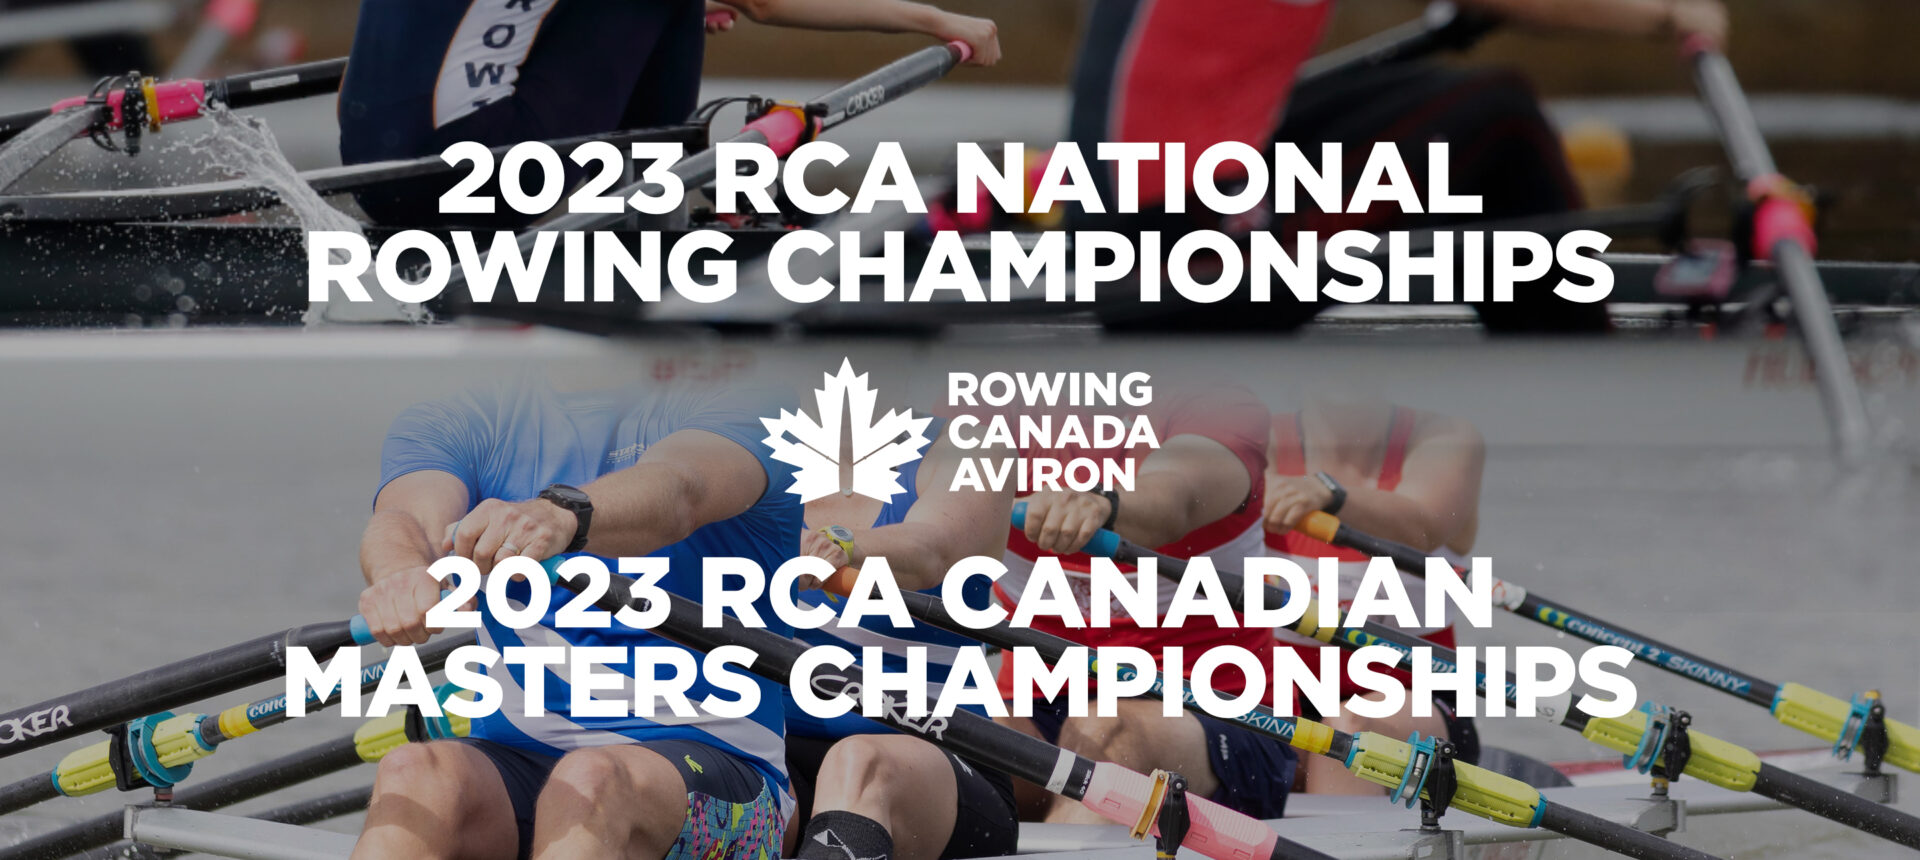 RCA’s National Championship Events announced for 2023